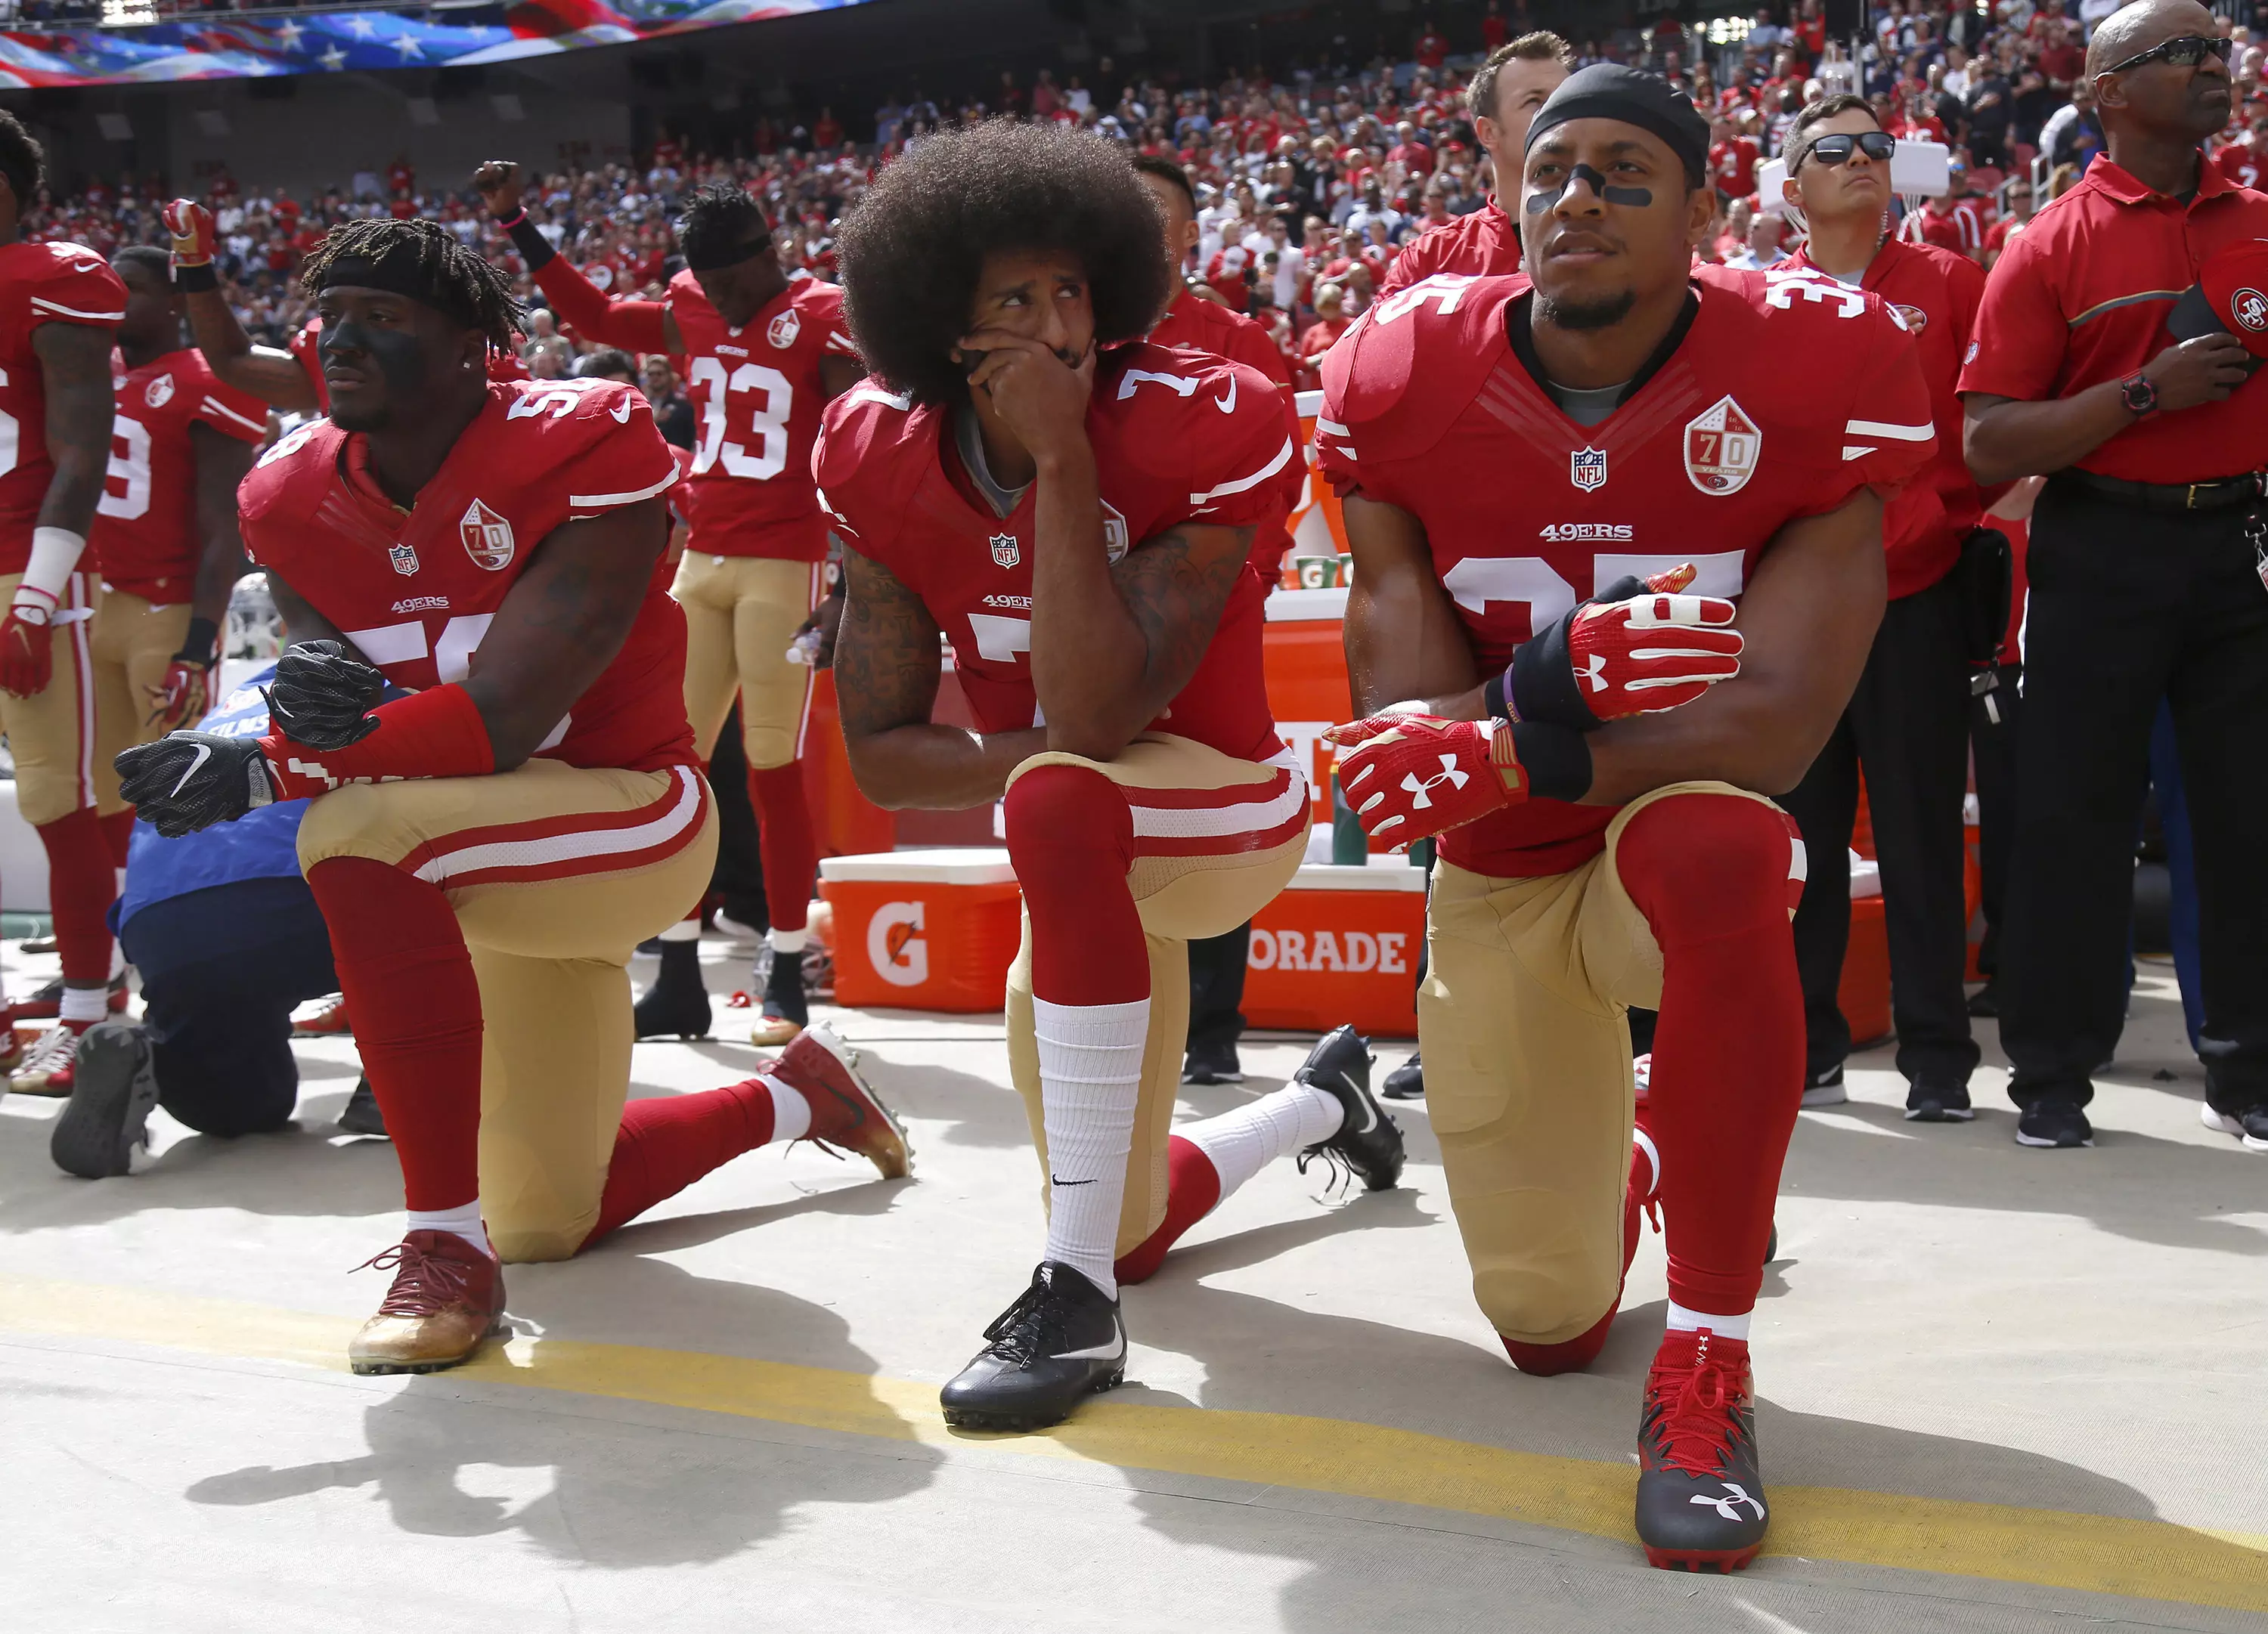 Colin Kaepernick and his teammates kneel in protest before an NFL game.